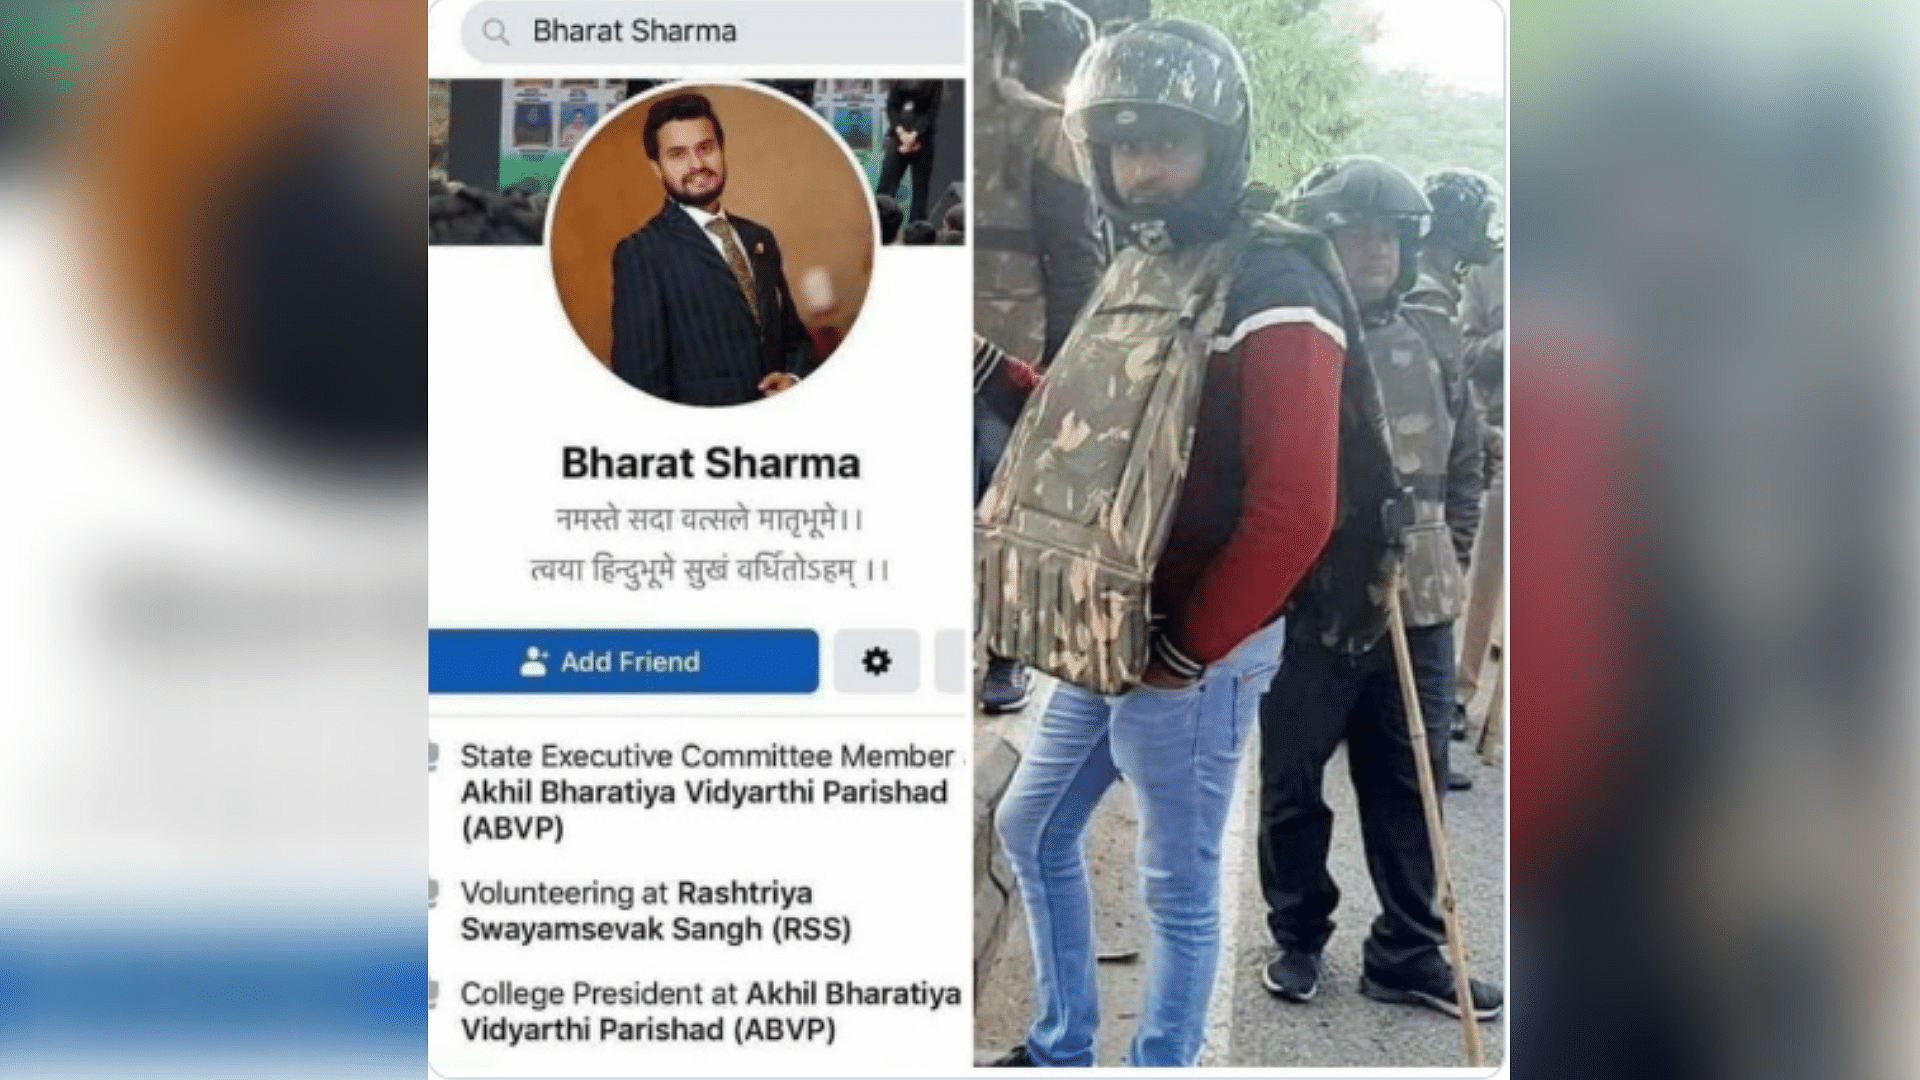 Several social media users claimed that the man seen in the image is ABVP member Bharat Sharma.